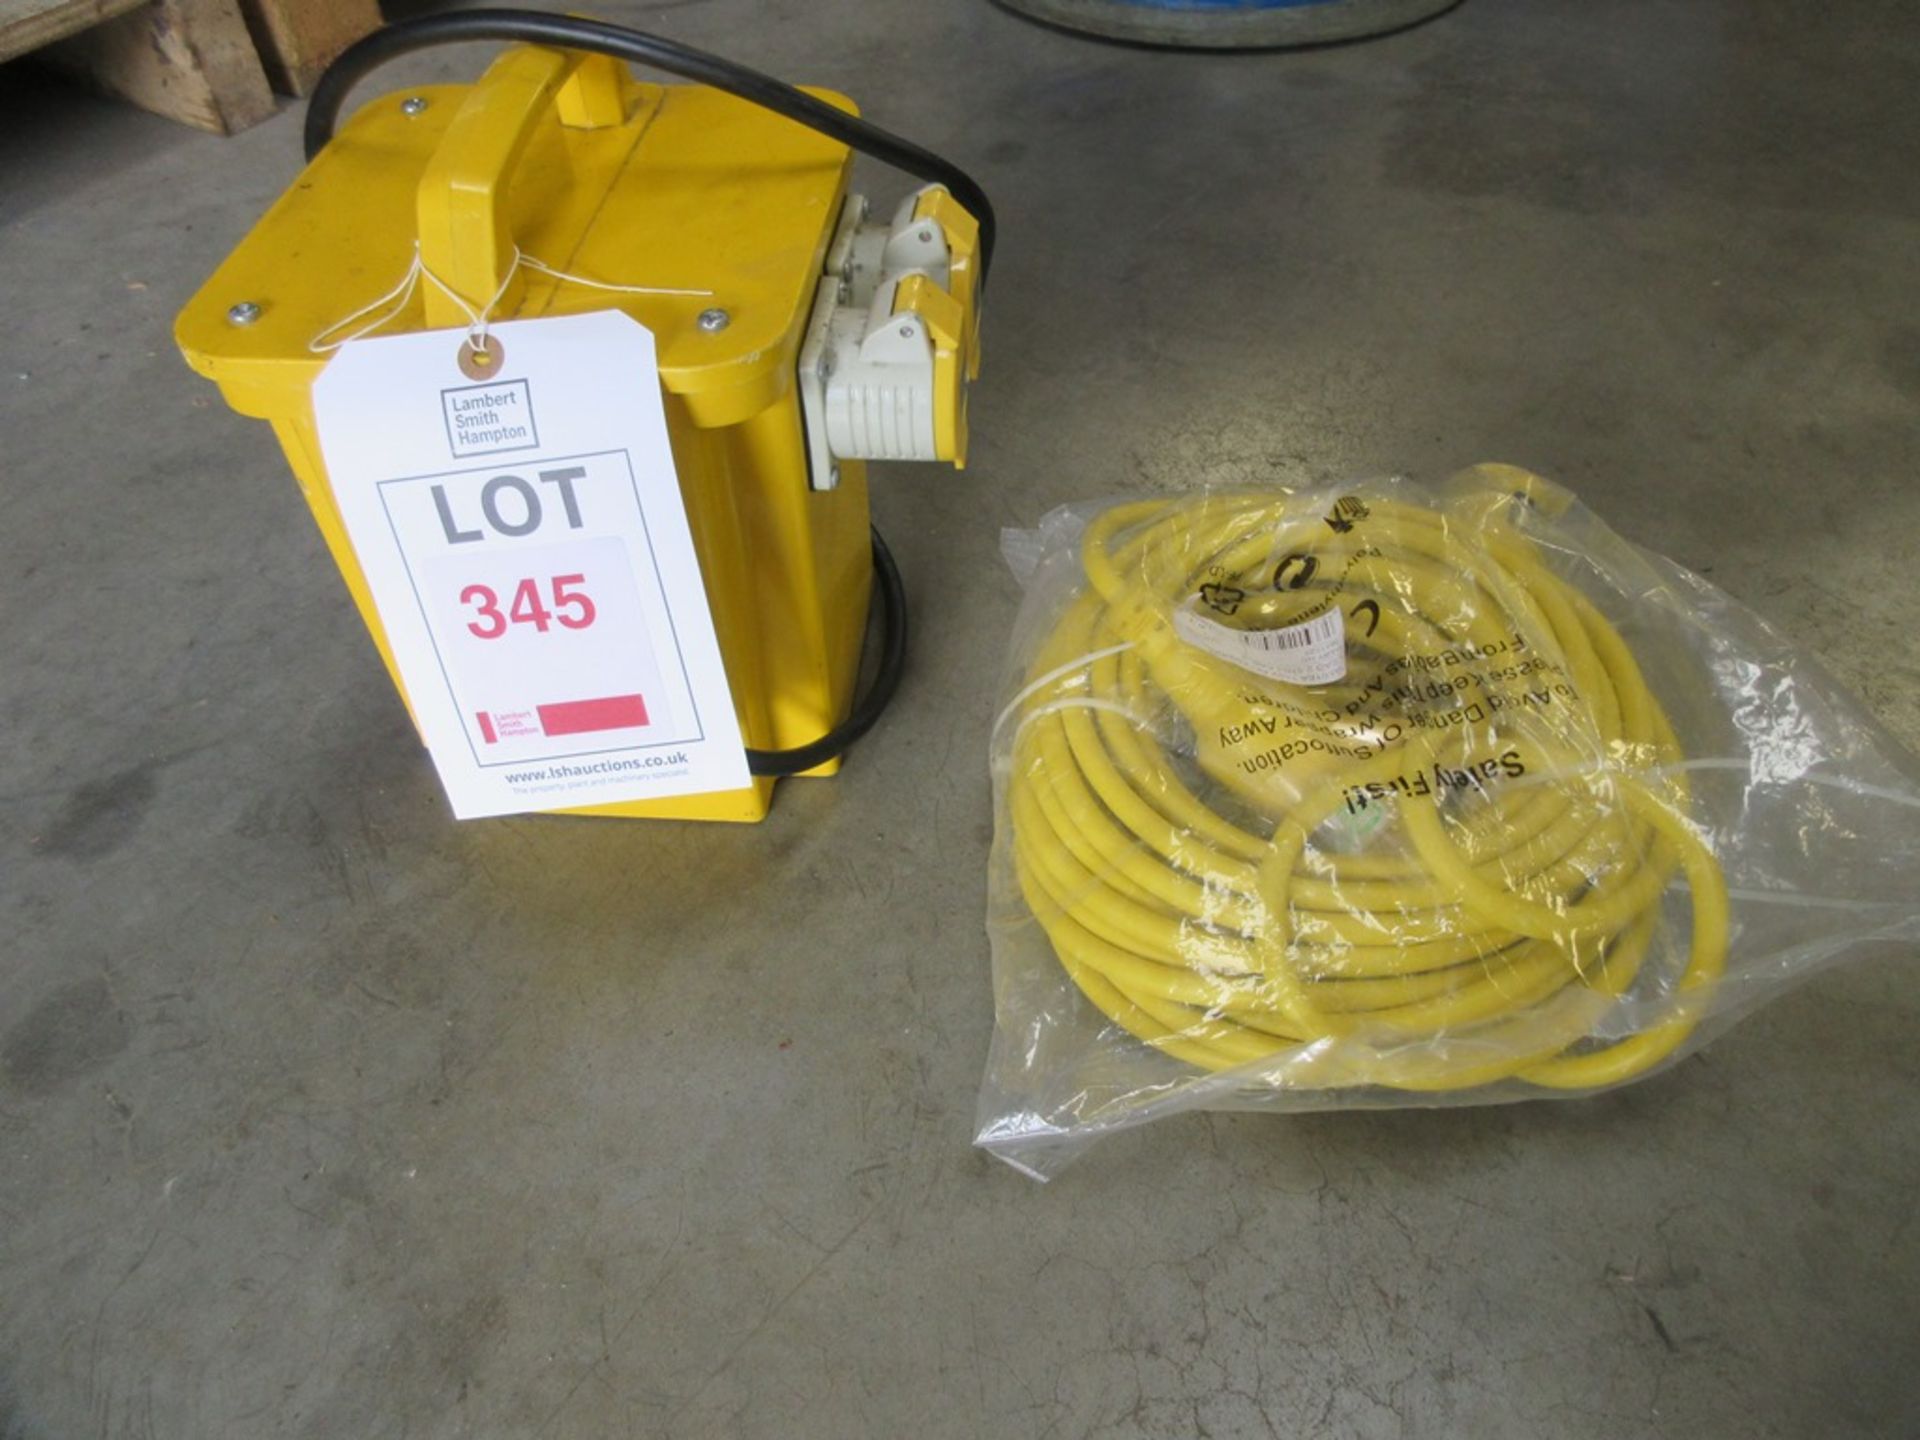 110V box and lead